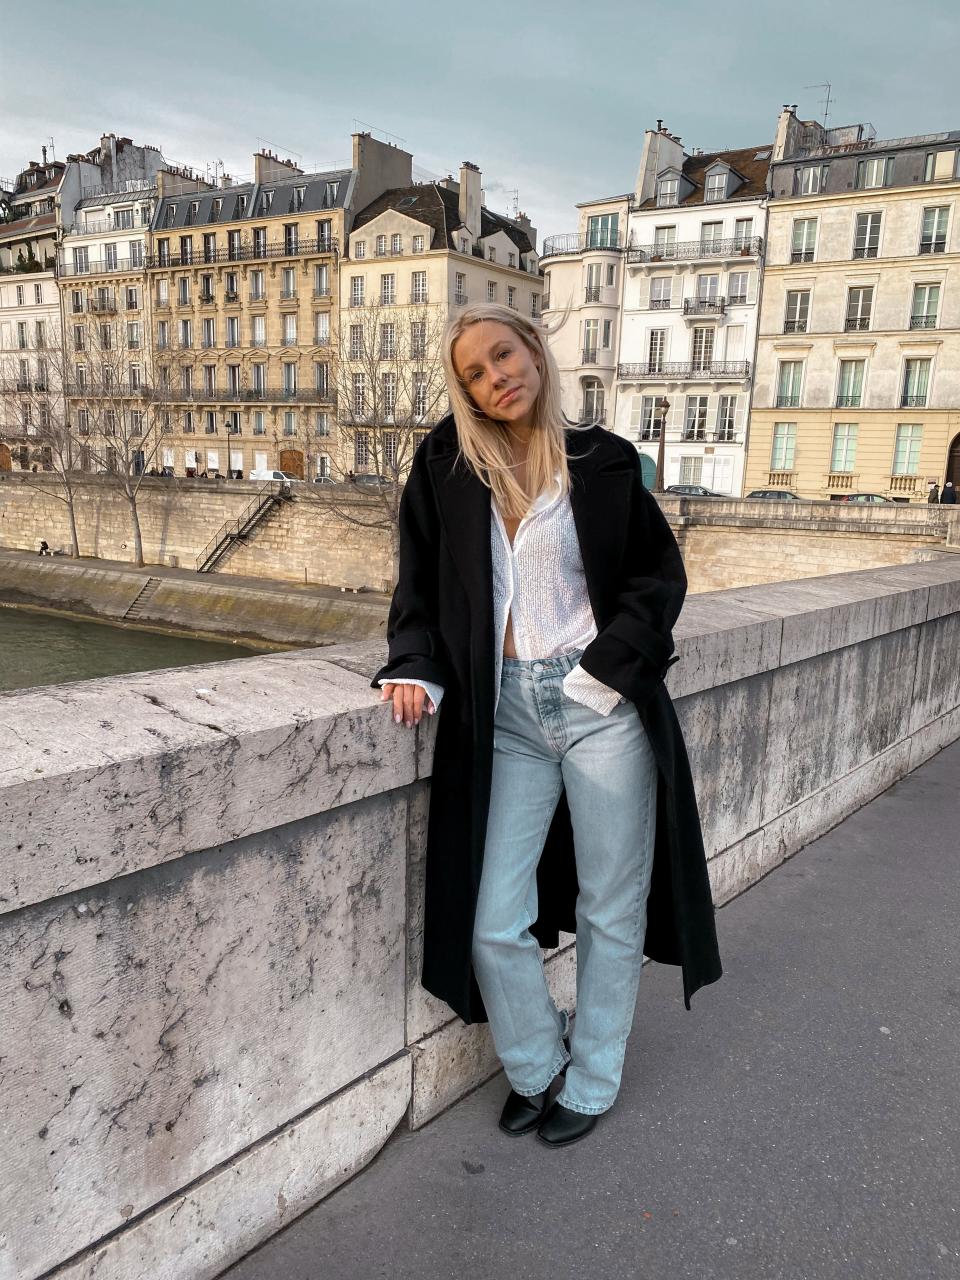 A woman with long blonde hair posing next to a bridge while wearing light blue jeans and a white shirt with a large black overcoat.